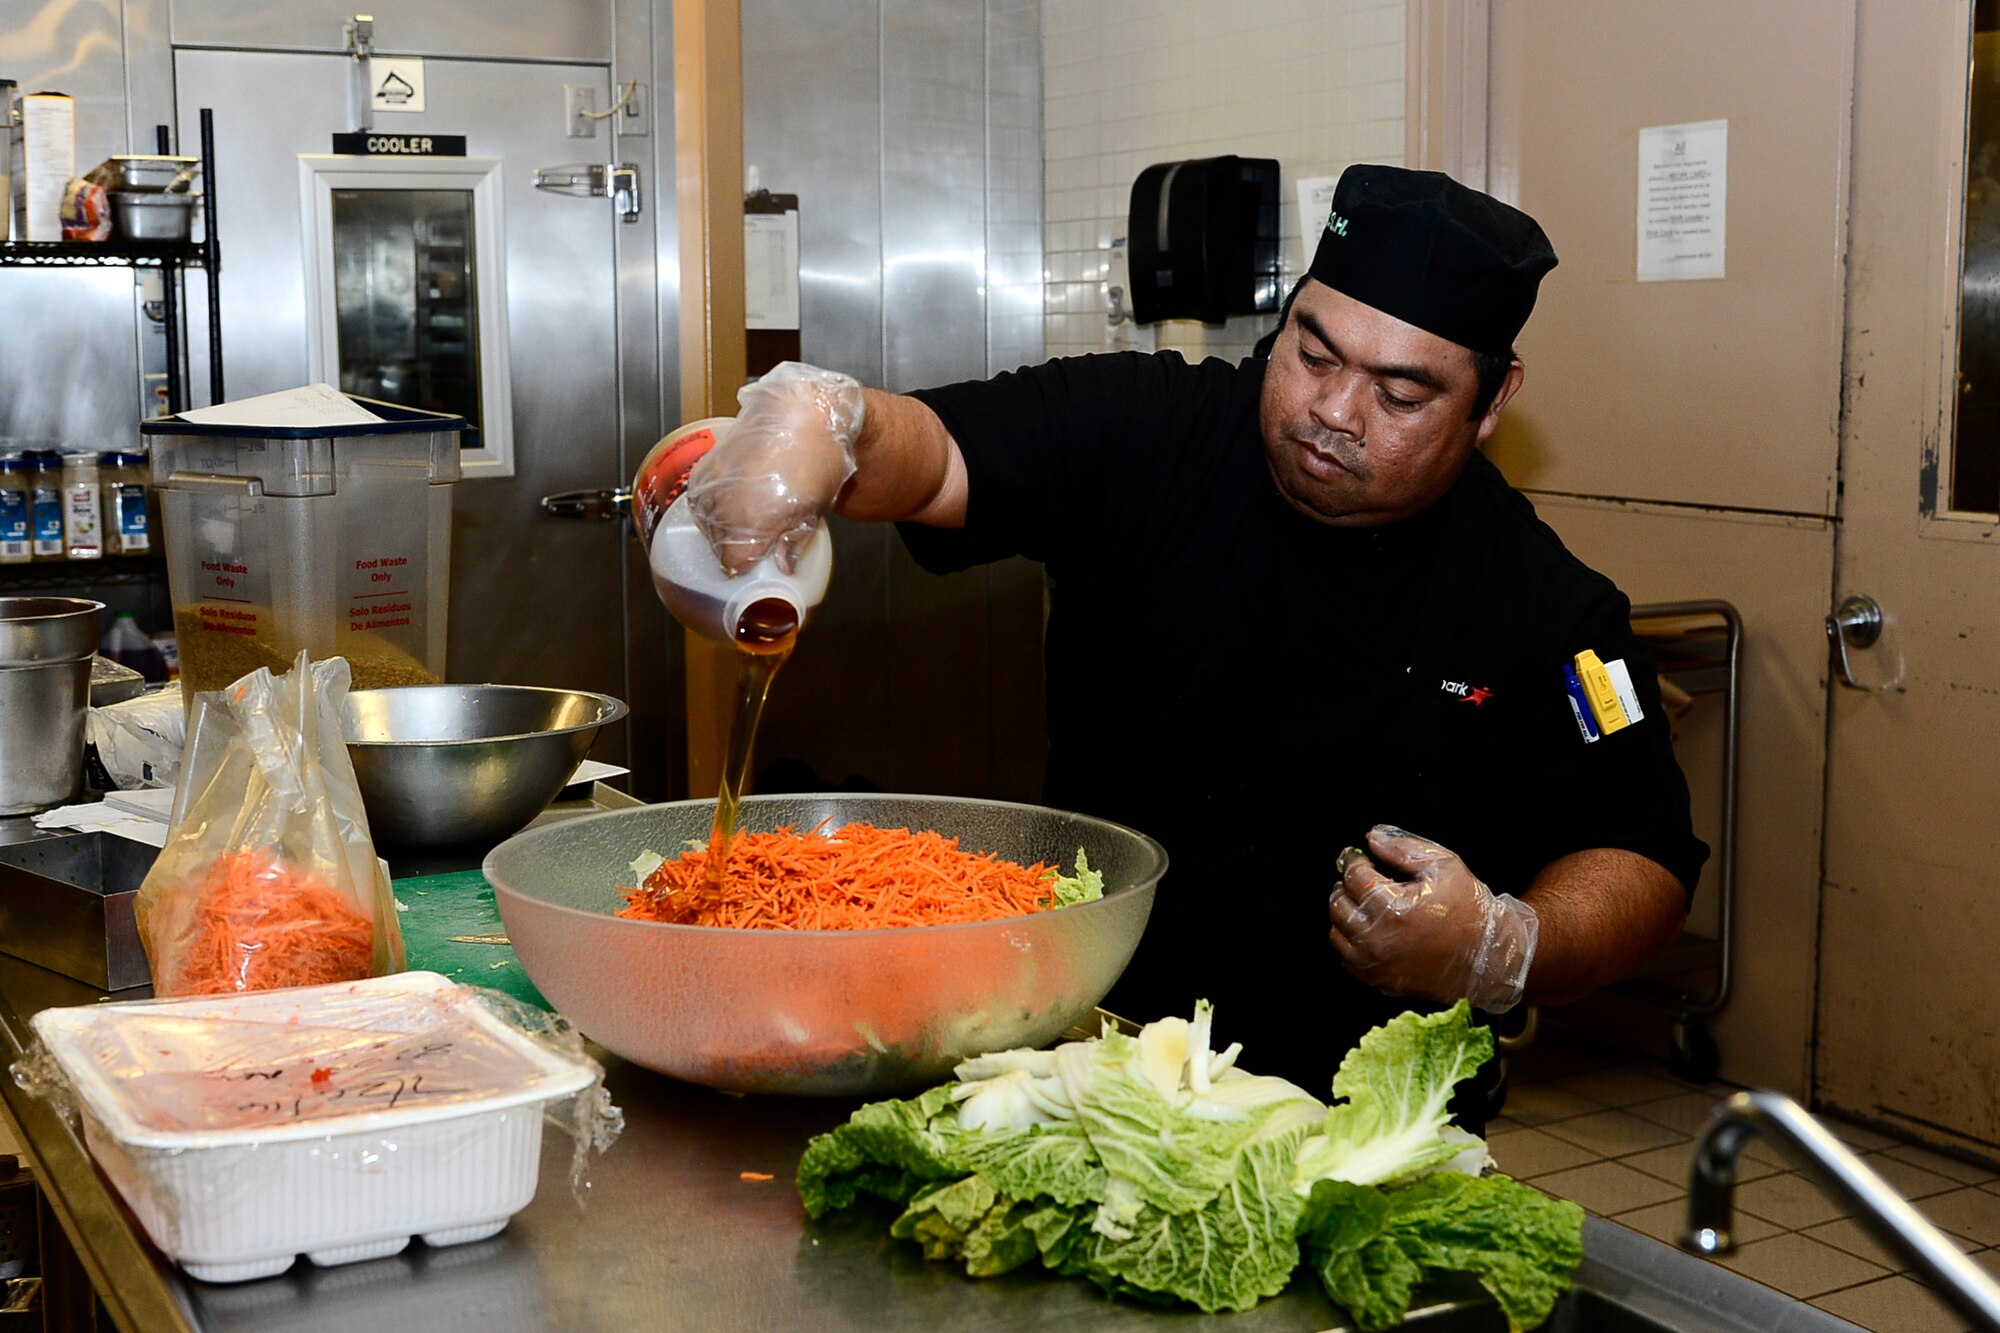 Nito Etang, a food specialist assigned to the 6th Force Support Squadron, prepares coleslaw for a Taco del Seoul themed lunch at MacDill Air Force Base, Fla., July 26, 2016. Dining facility members follow recipe cards to ensure consistent food preparation. (U.S. Air Force photo by Senior Airman Tori Schultz)